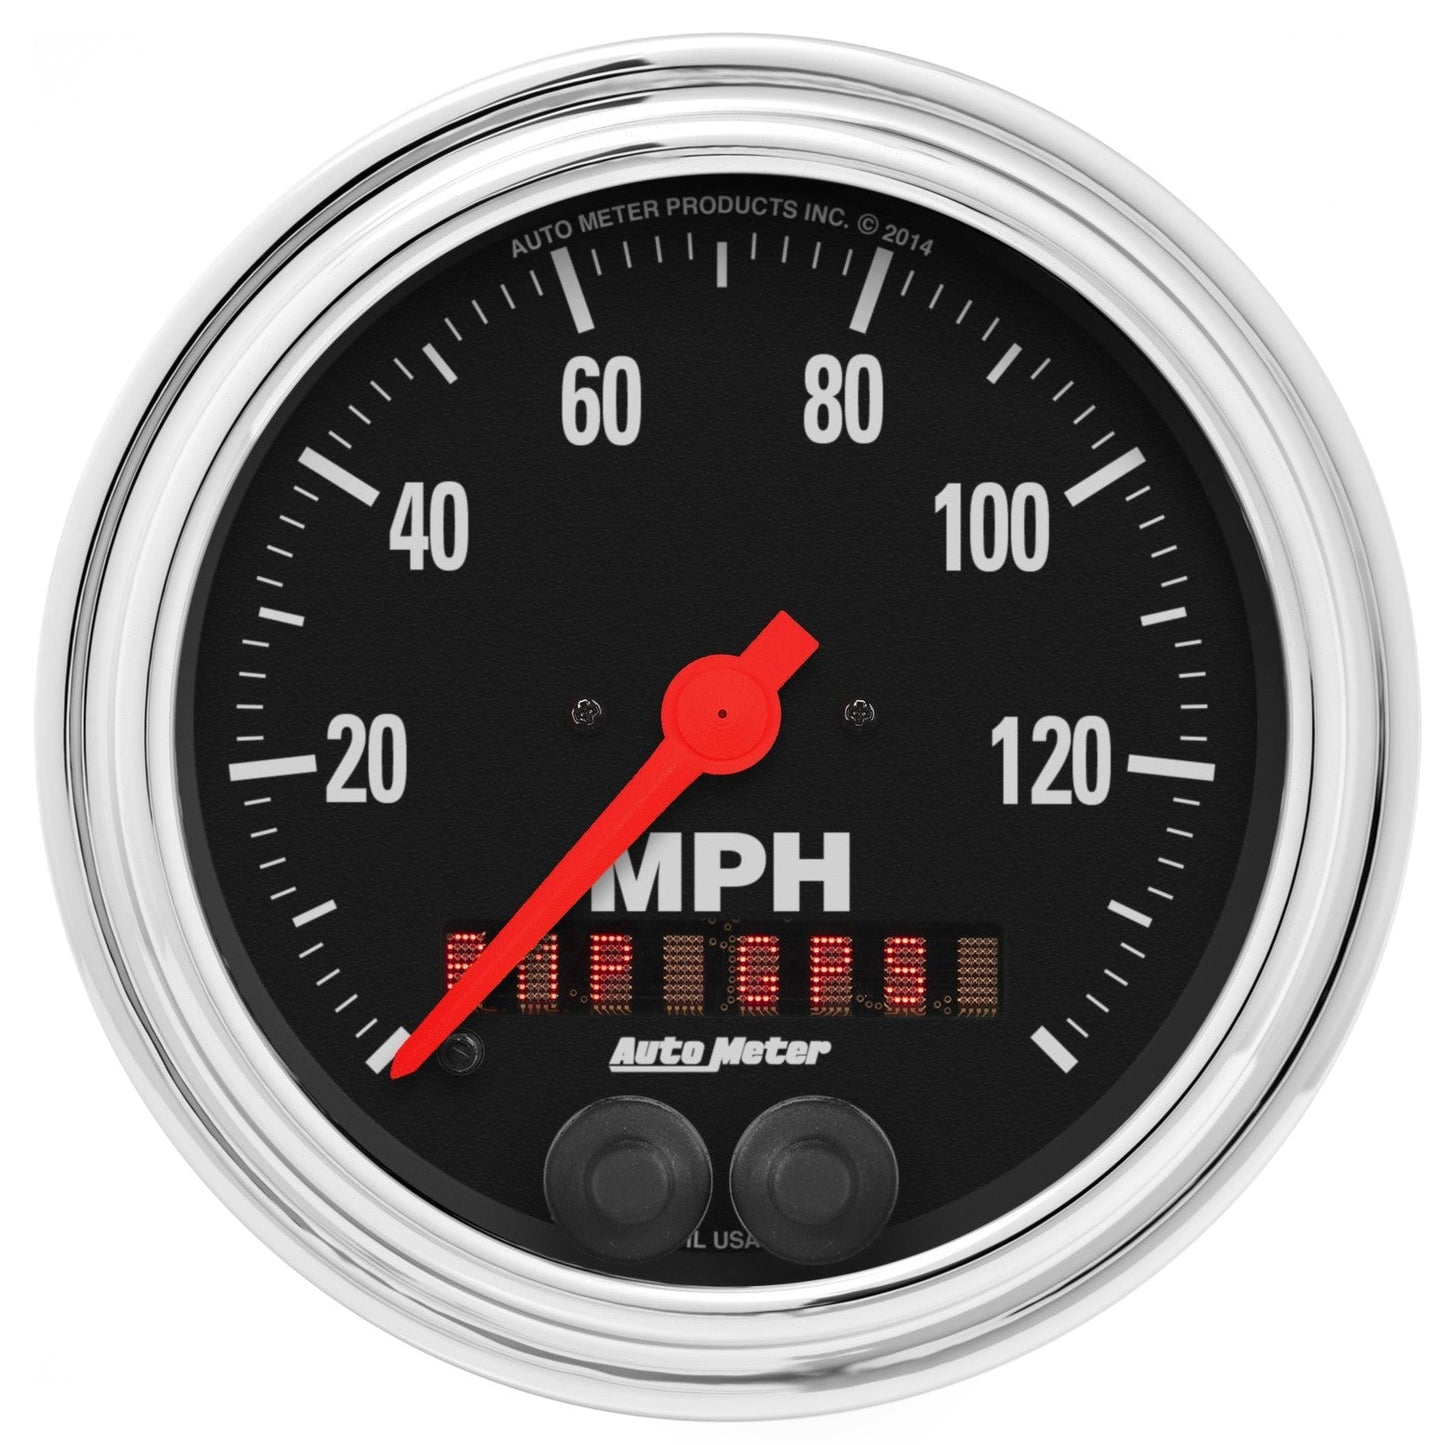 AutoMeter - 3-3/8" GPS SPEEDOMETER, 0-140 MPH, TRADITIONAL CHROME (2480)